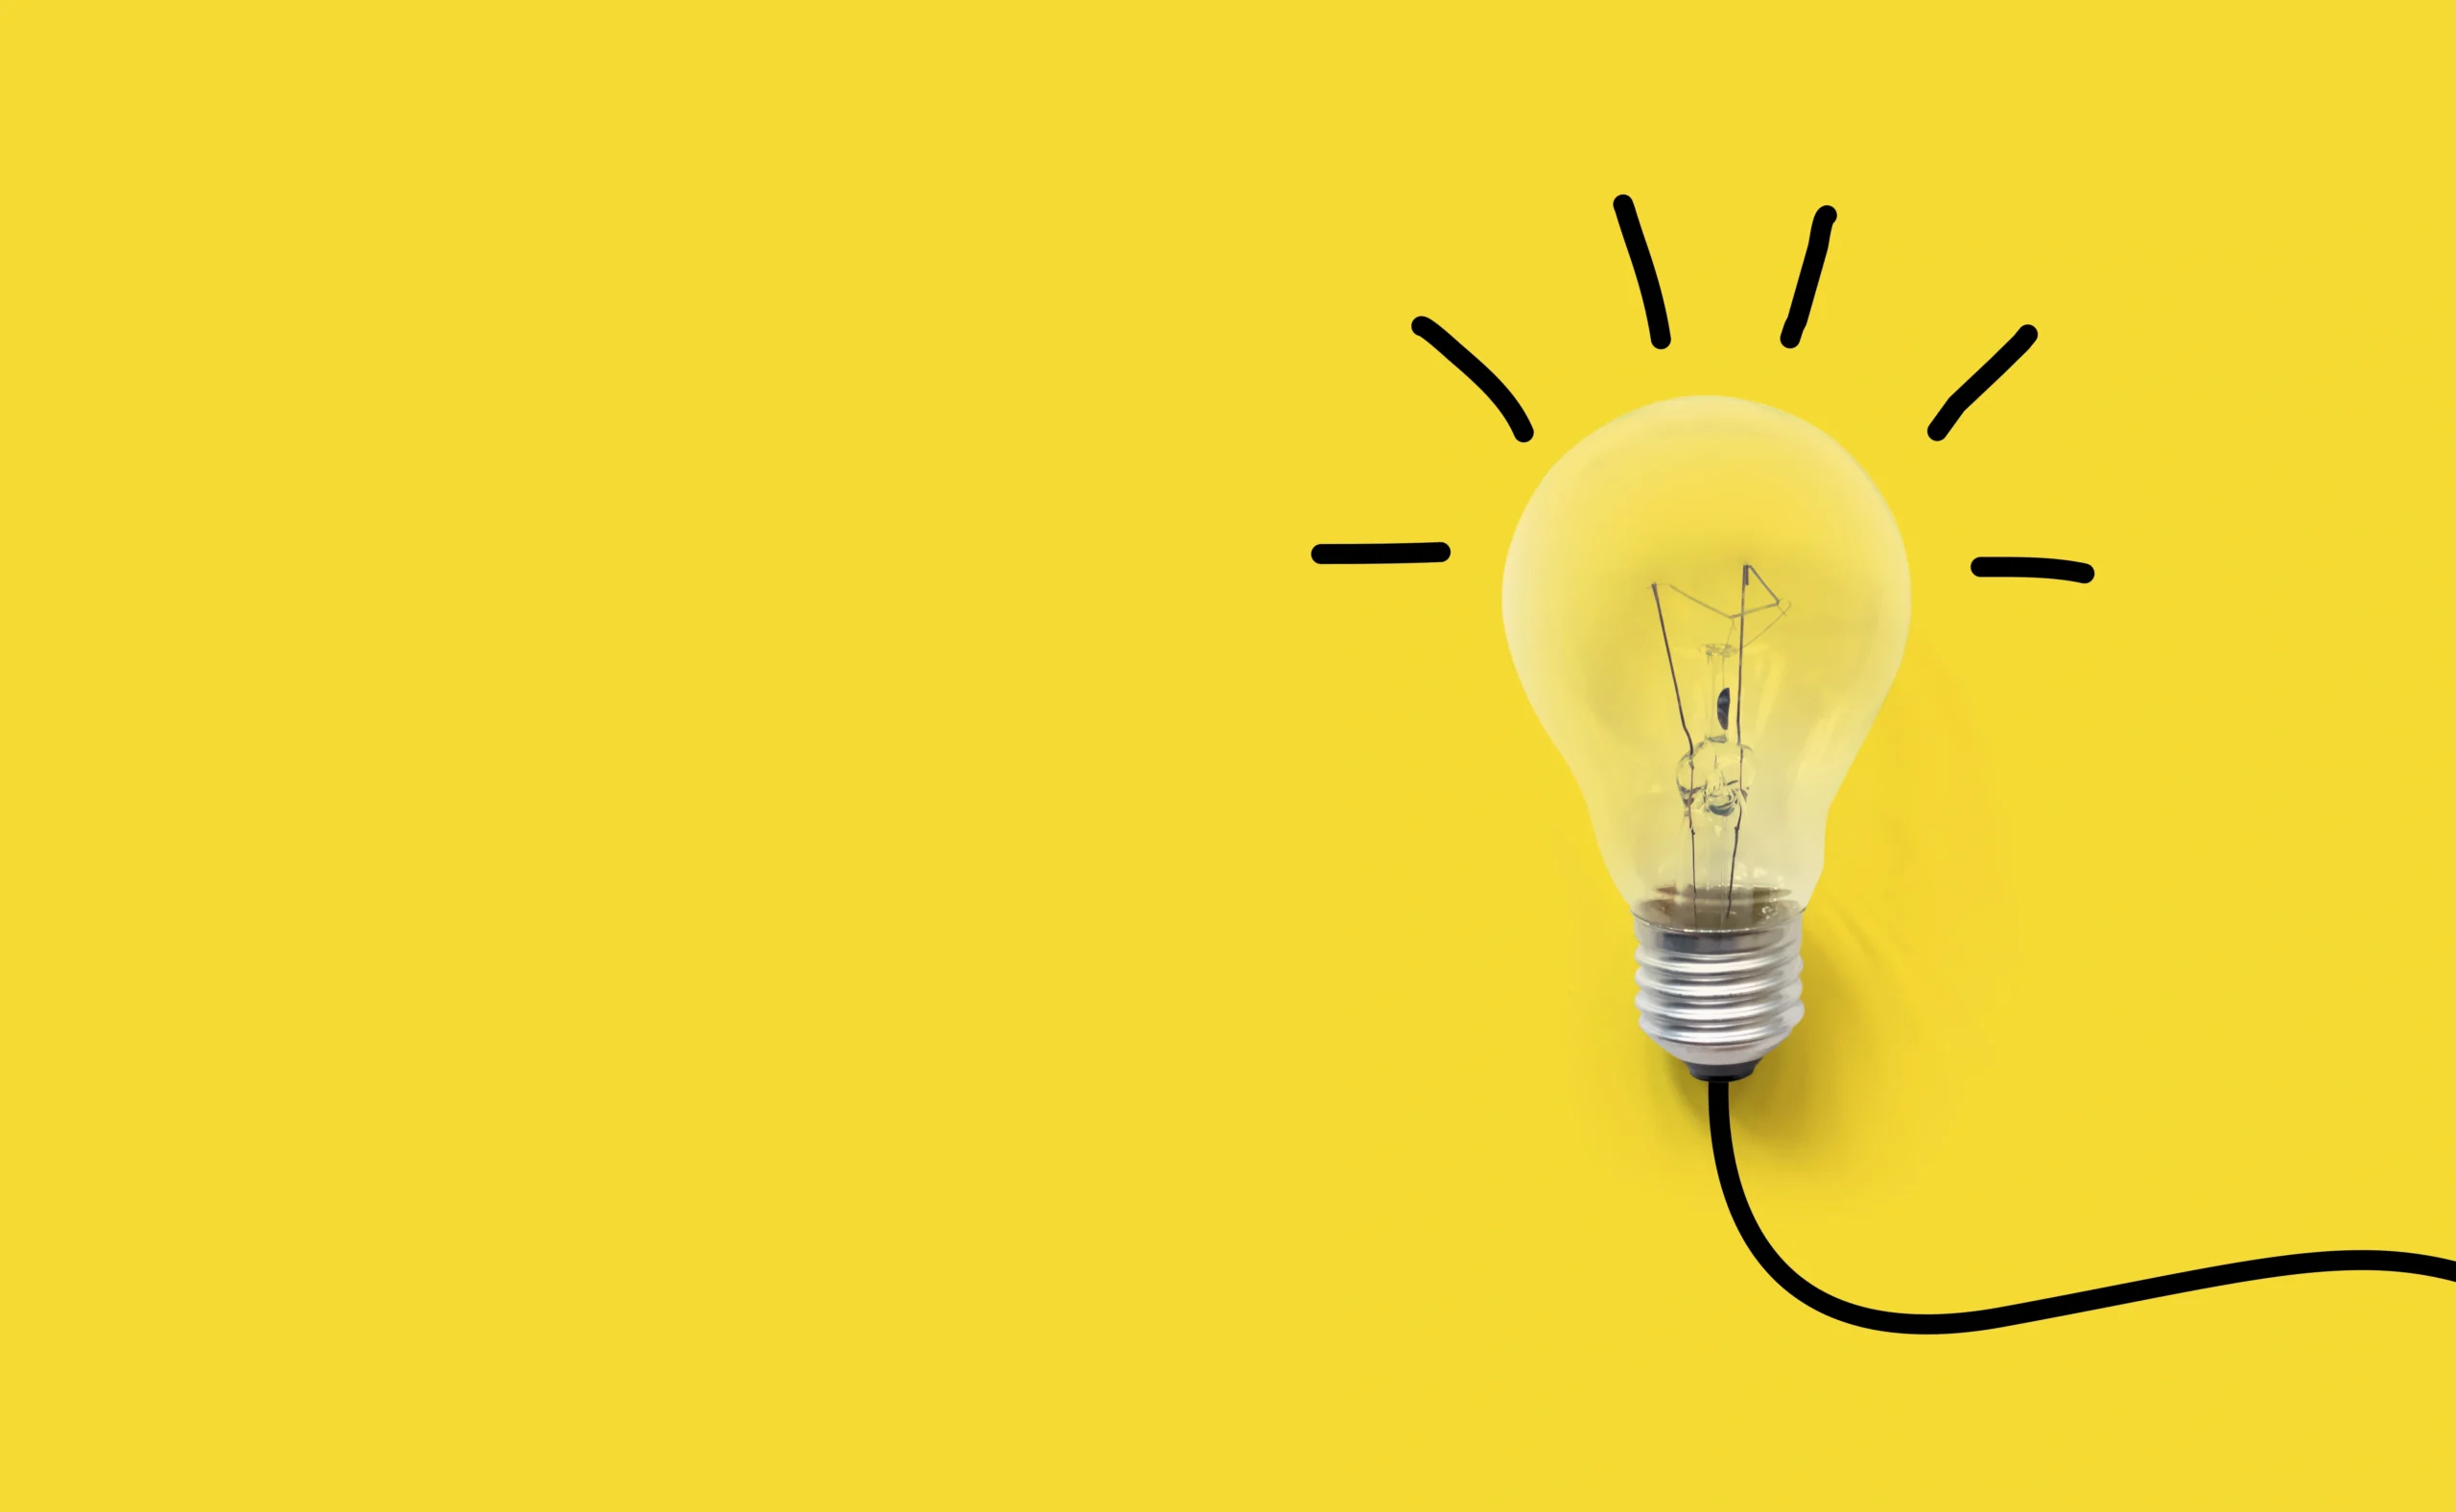 A stock image of a lightbulb against a yellow background